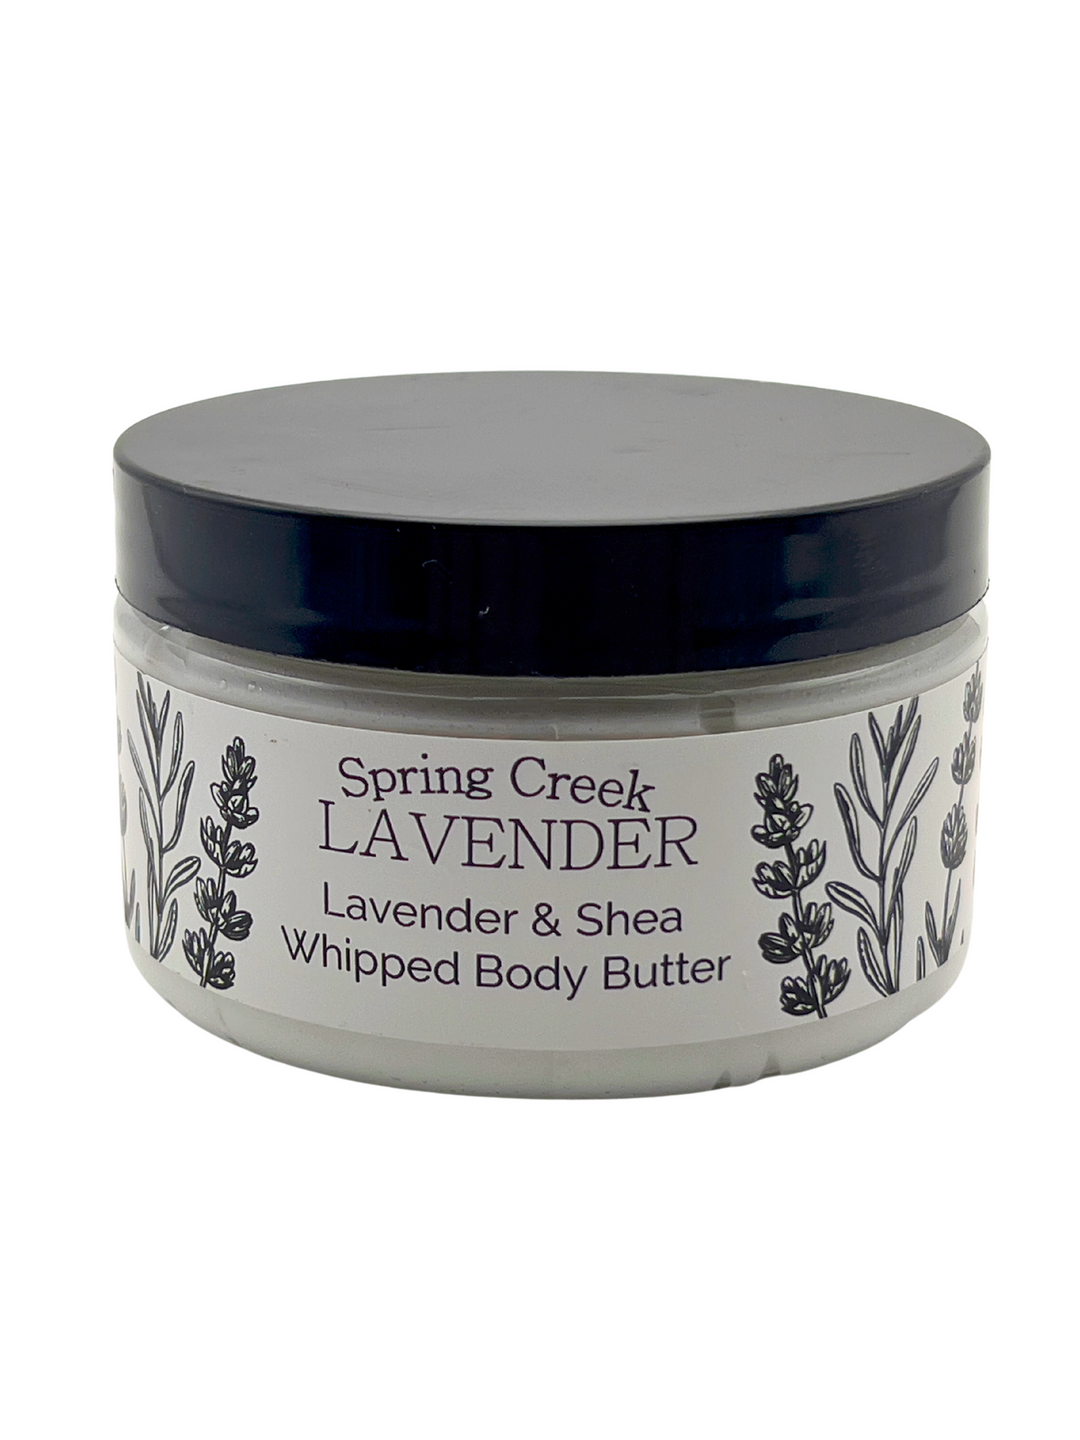 Lavender and Shea Whipped Body Butter